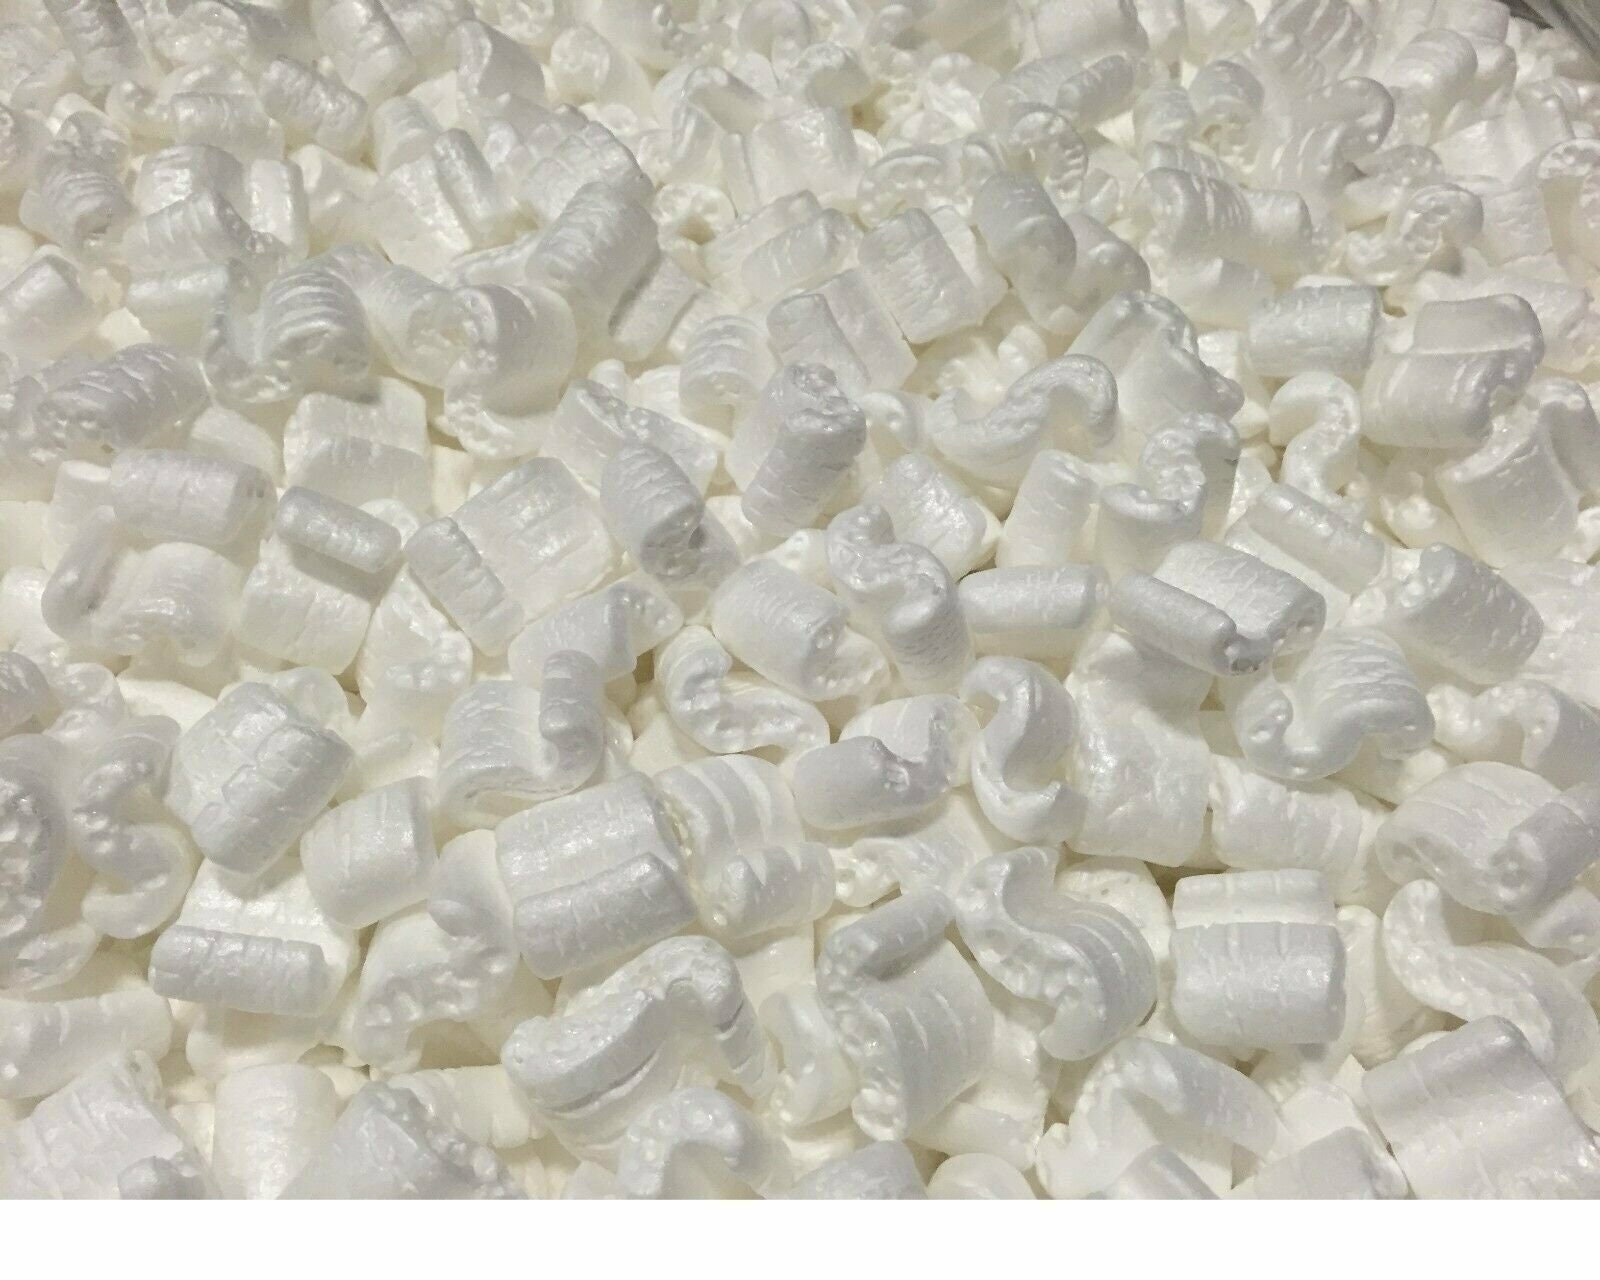 New Packing Peanuts - 3.5 Cu.Ft.